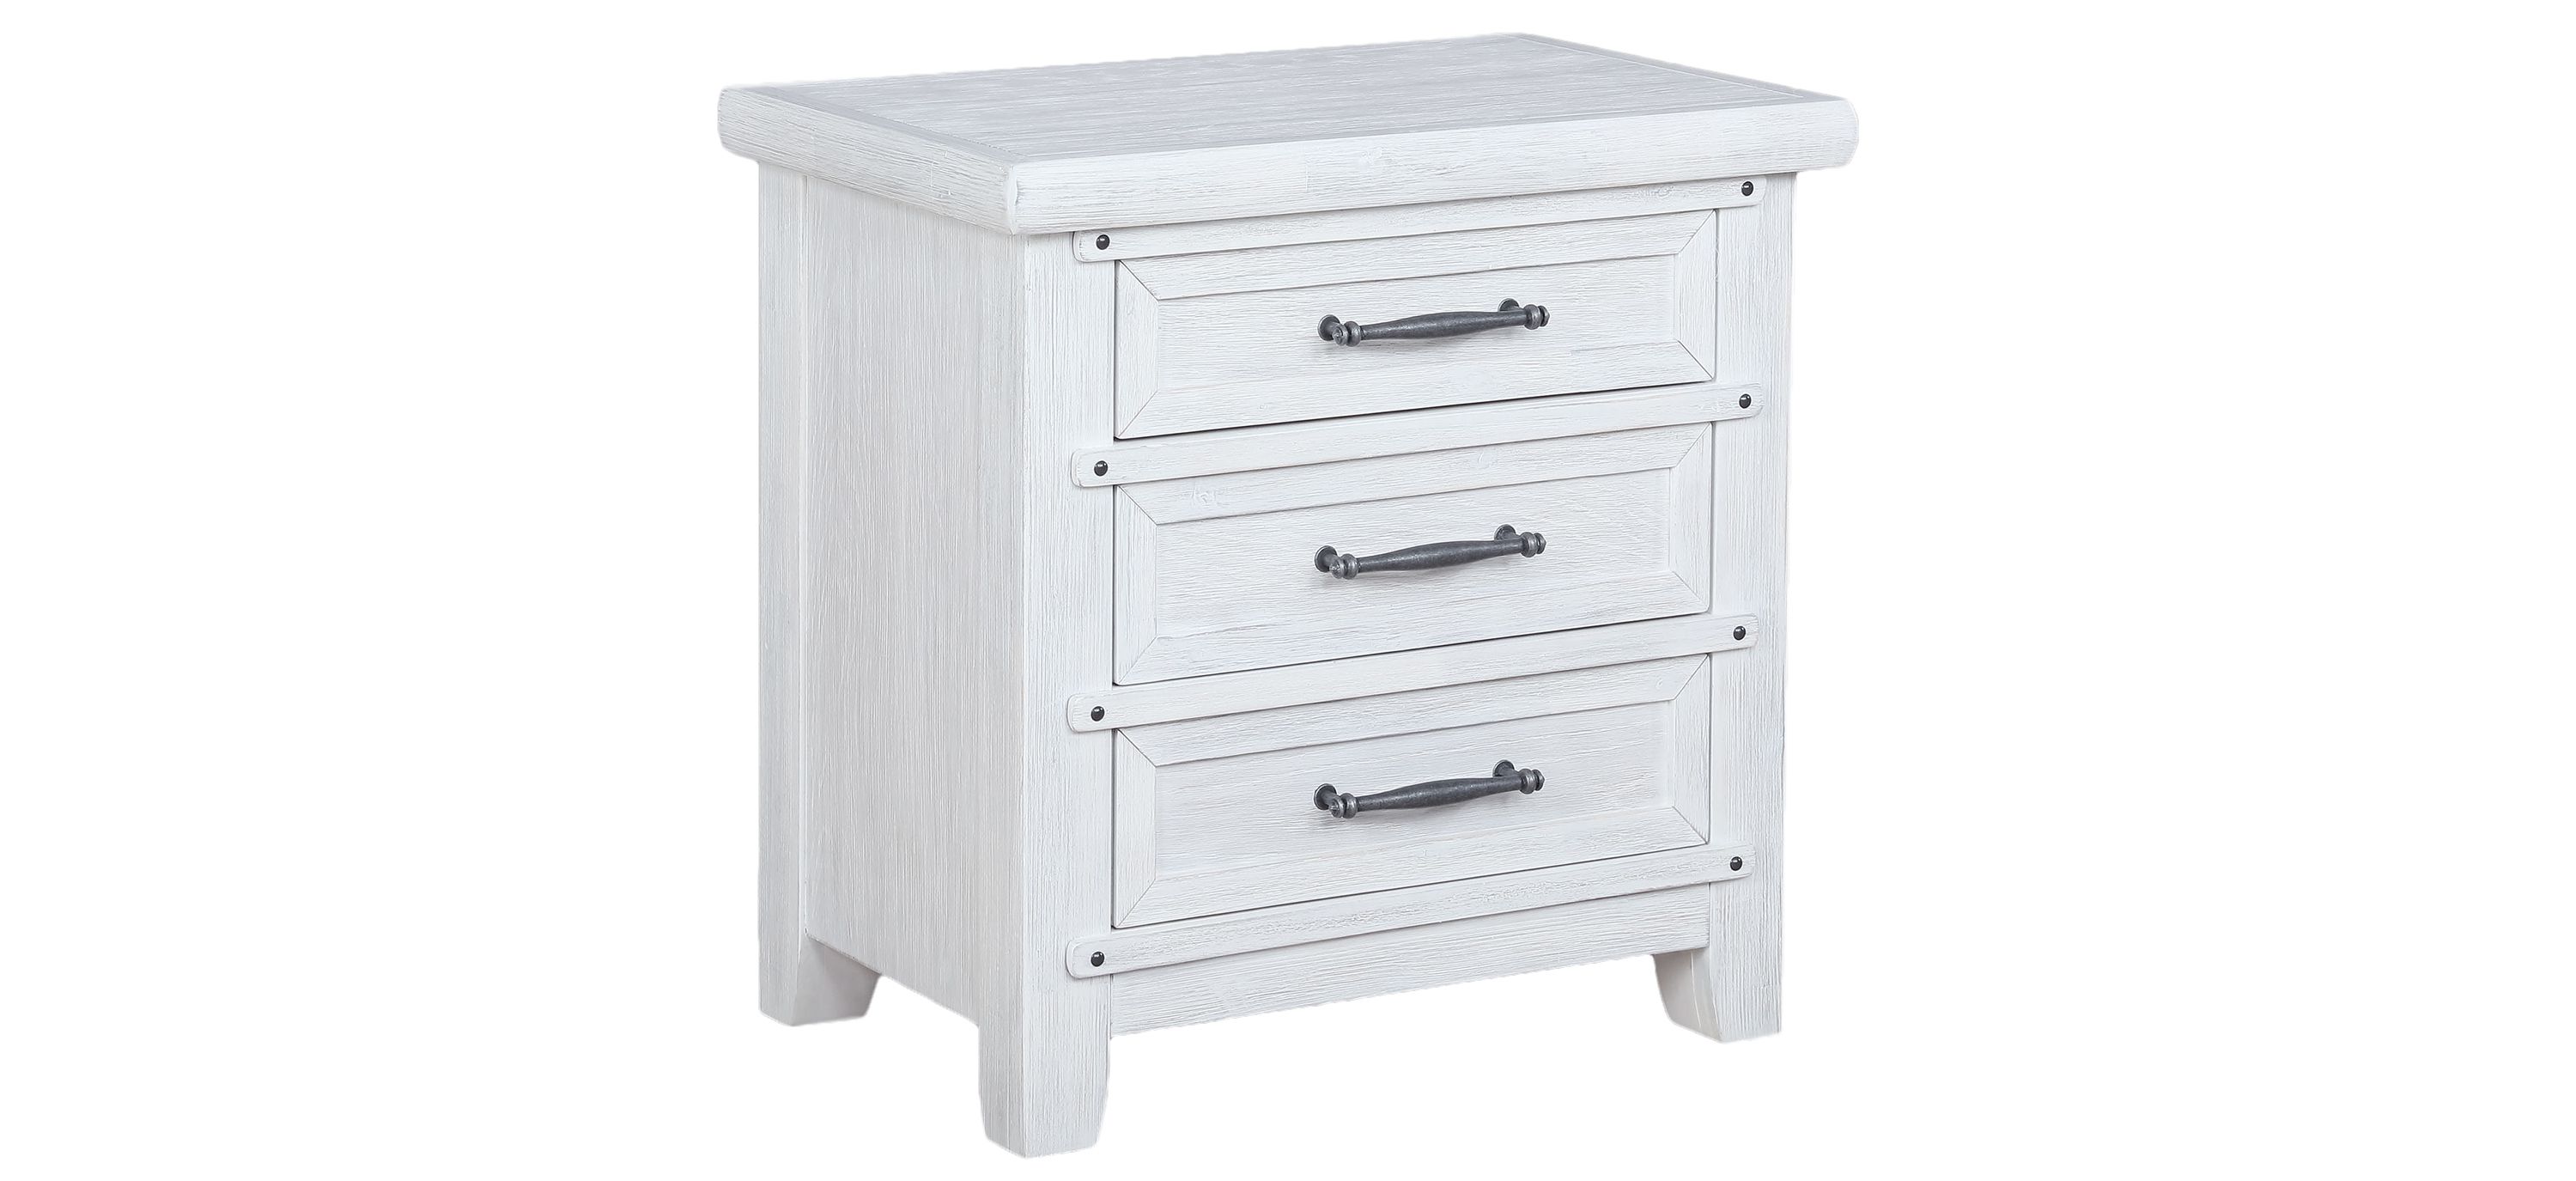 Maybelle Nightstand